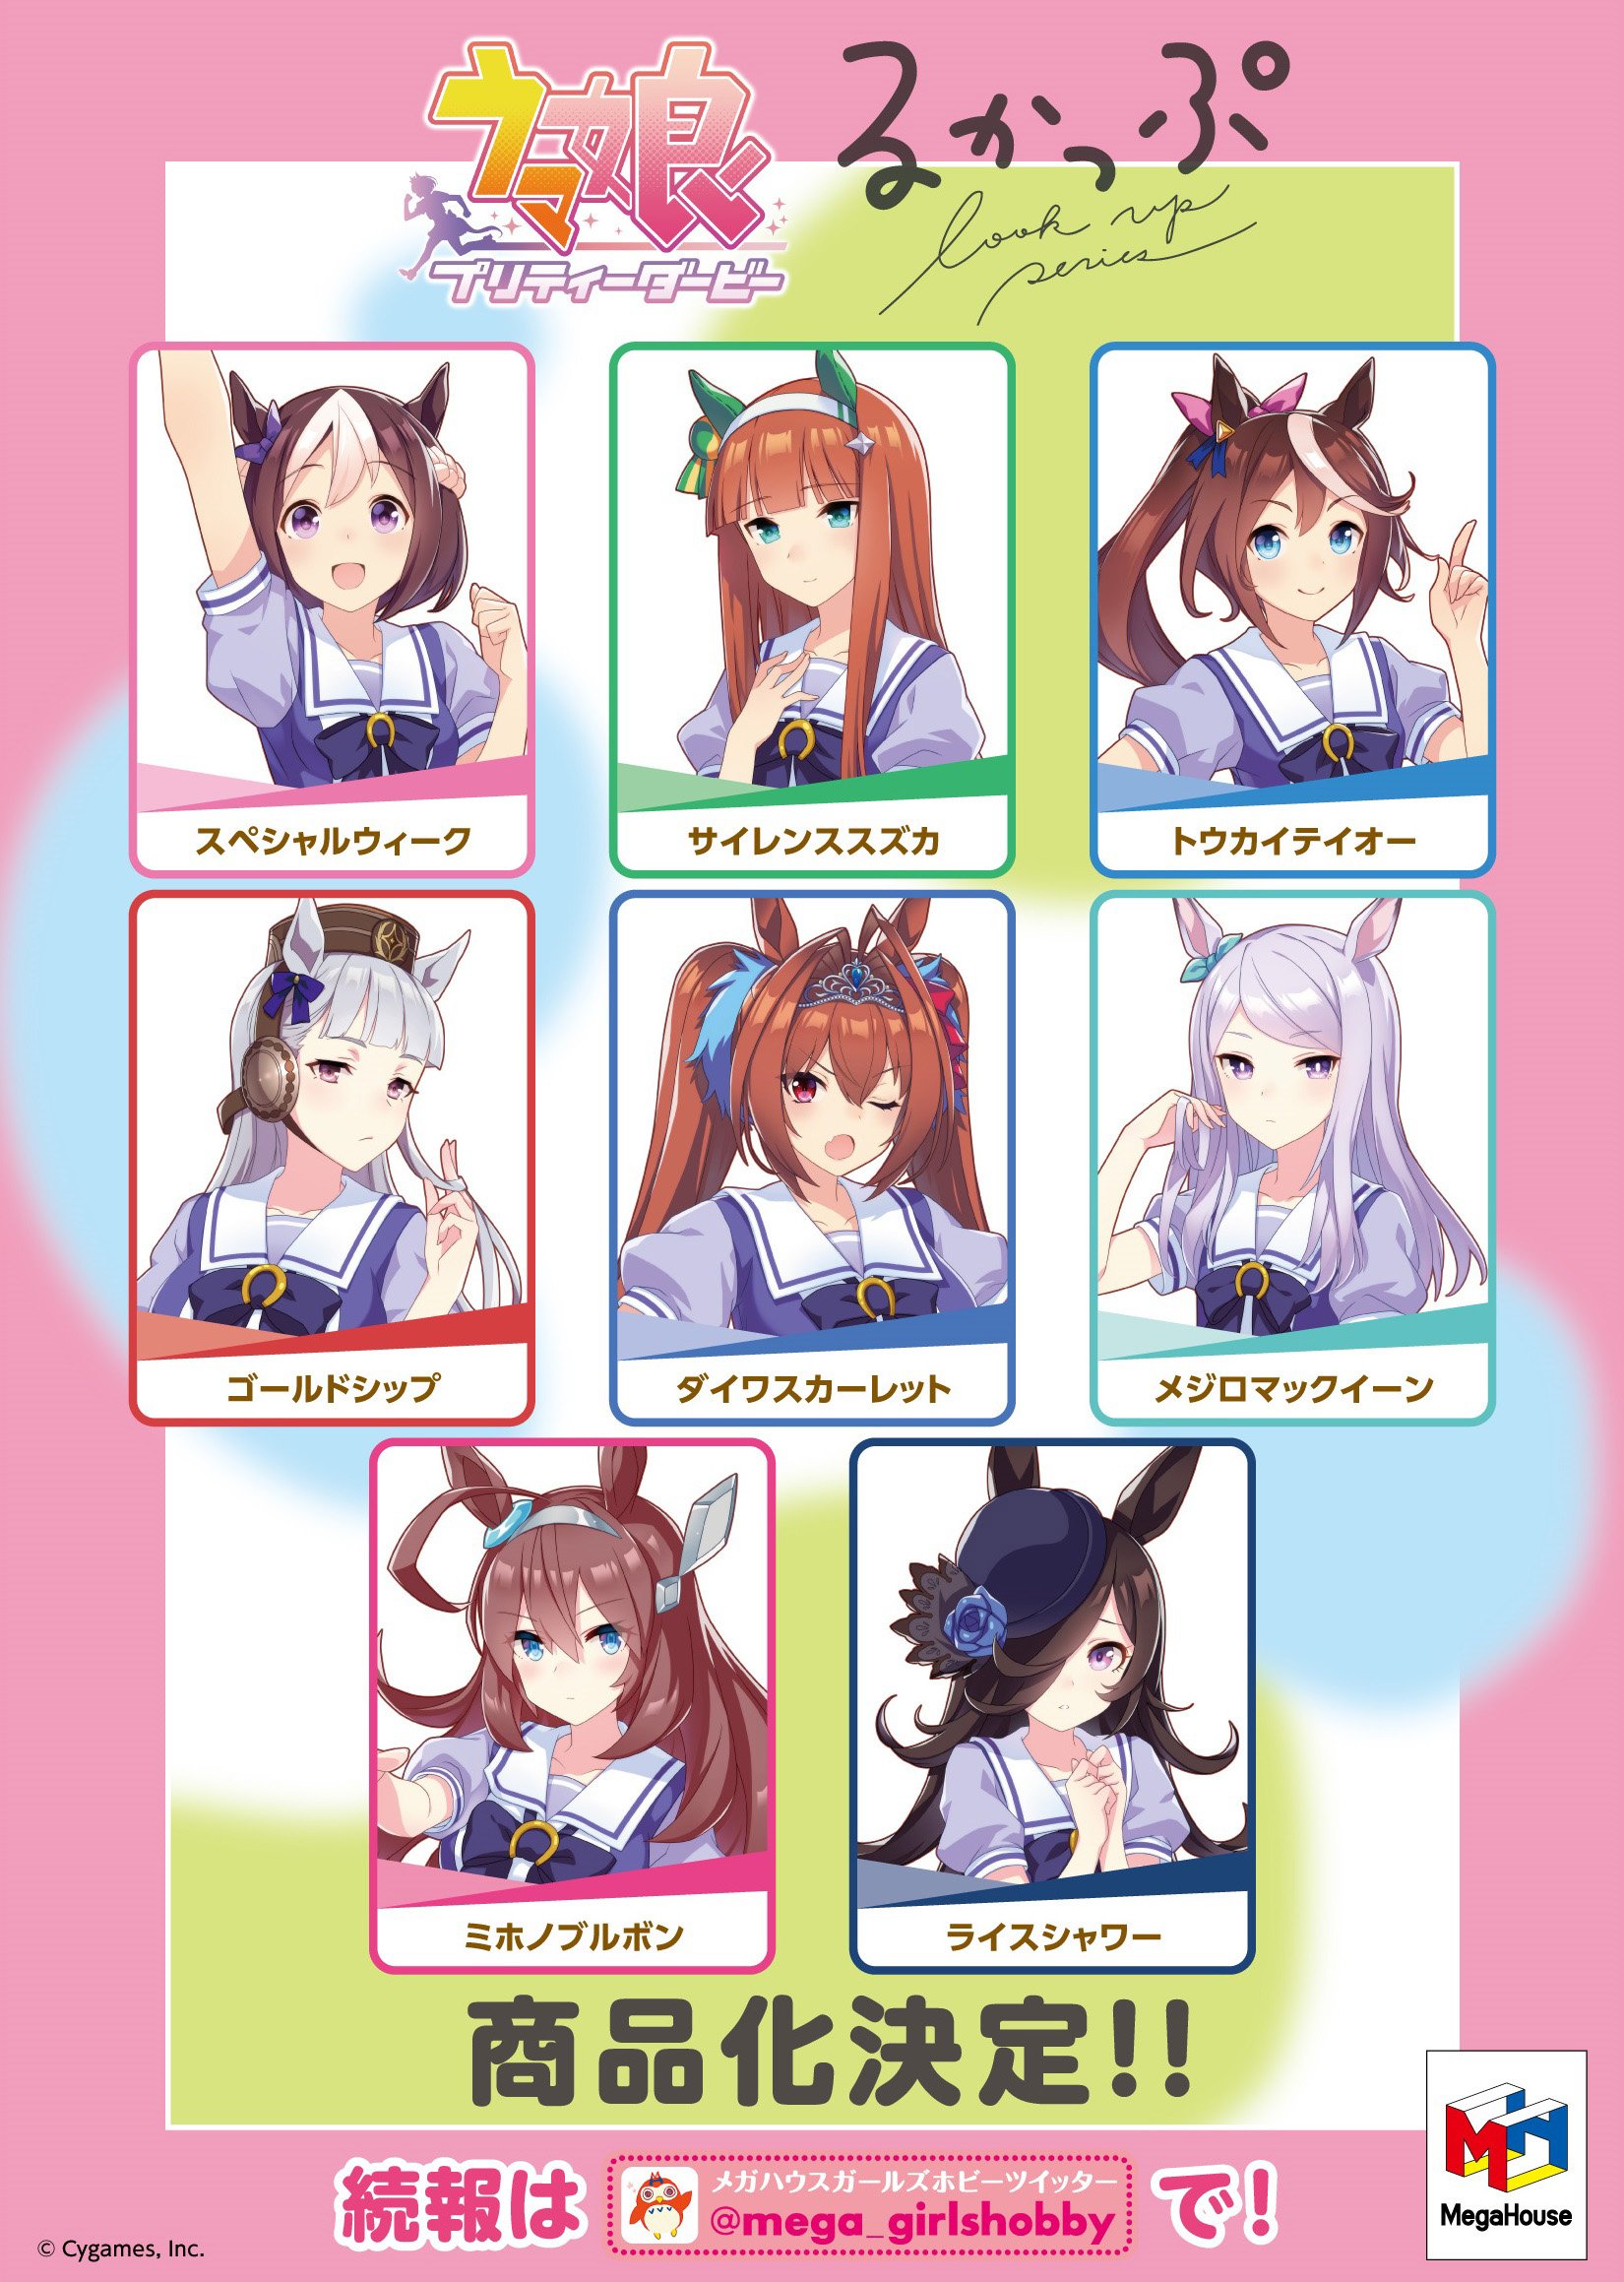 Uma Musume: Pretty Derby - Look Up (MegaHouse)